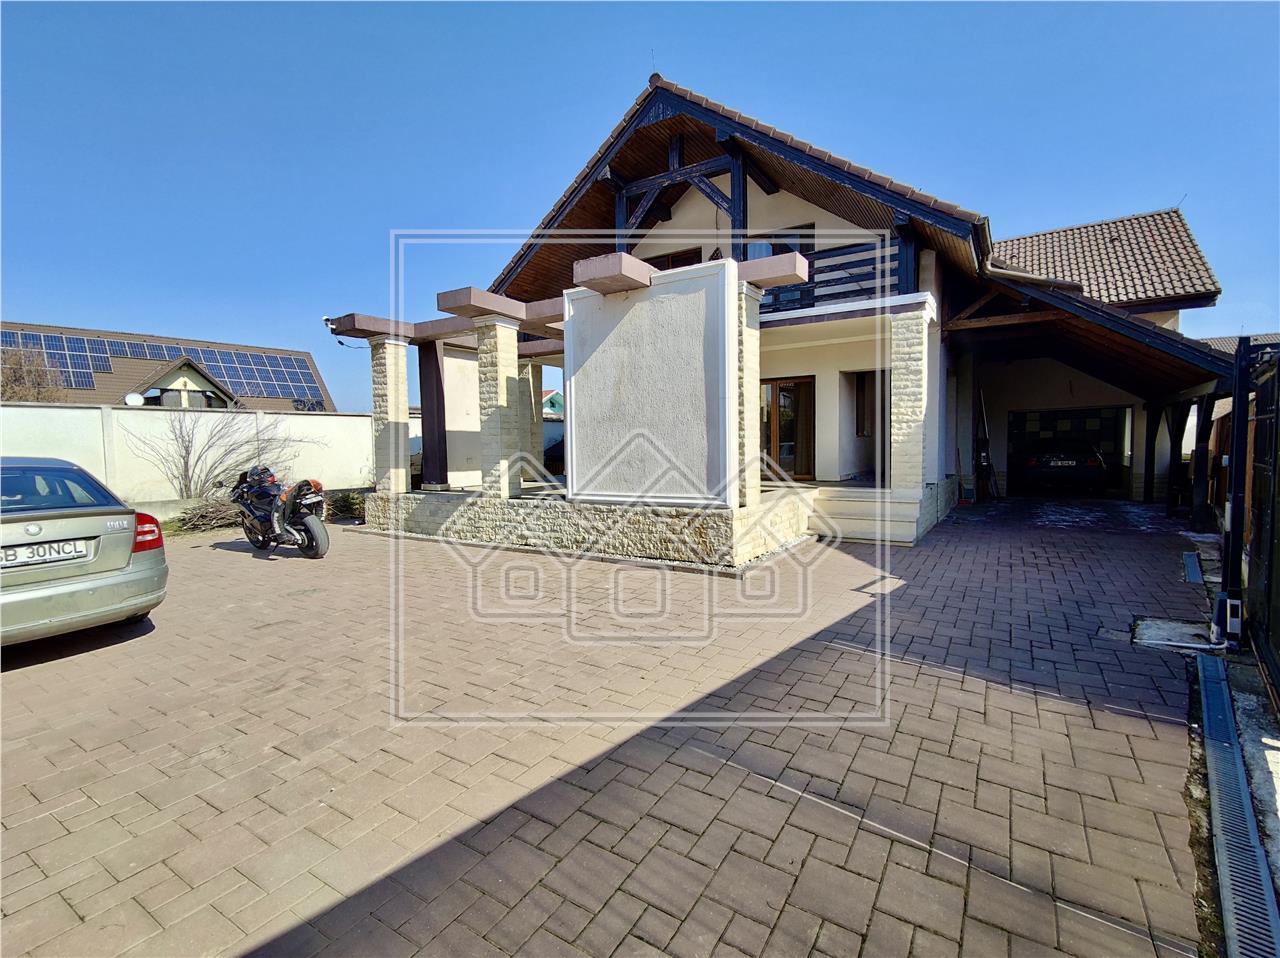 House for sale in Sibiu - Selimbar, in the Mall area, Lukoil